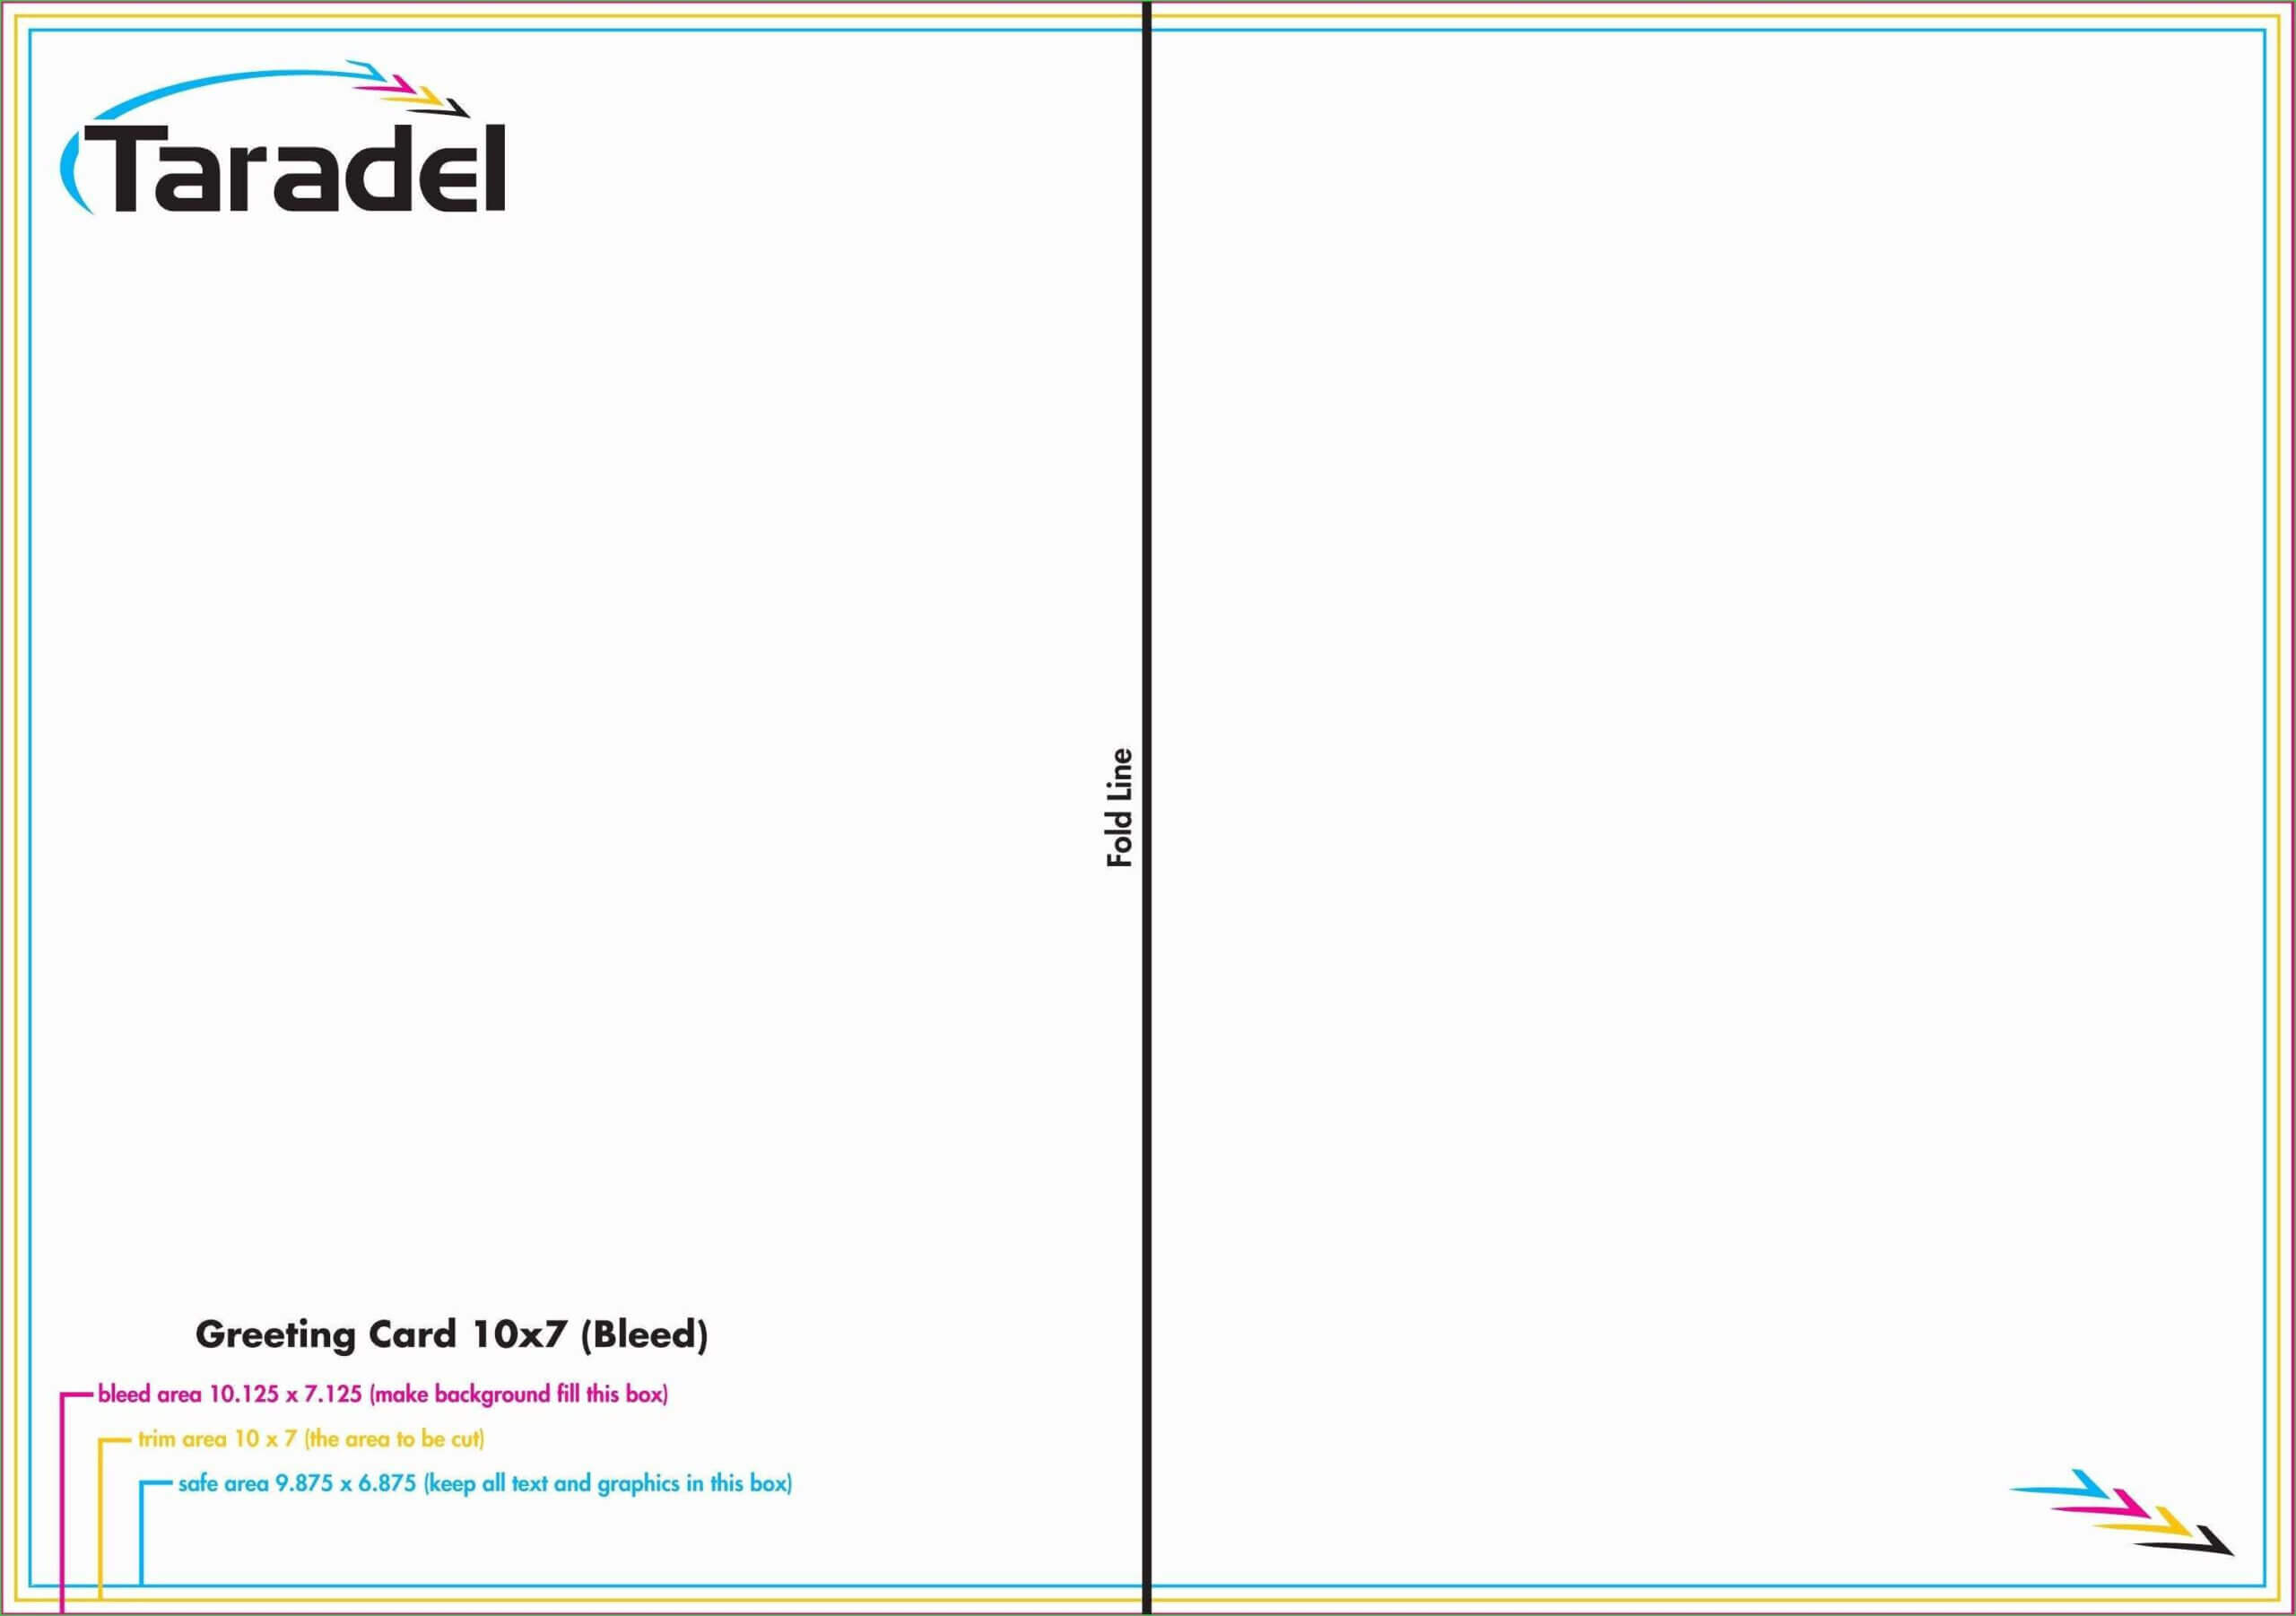 003 Quarter Fold Card Template Photoshop Indesign Greeting Intended For Blank Quarter Fold Card Template